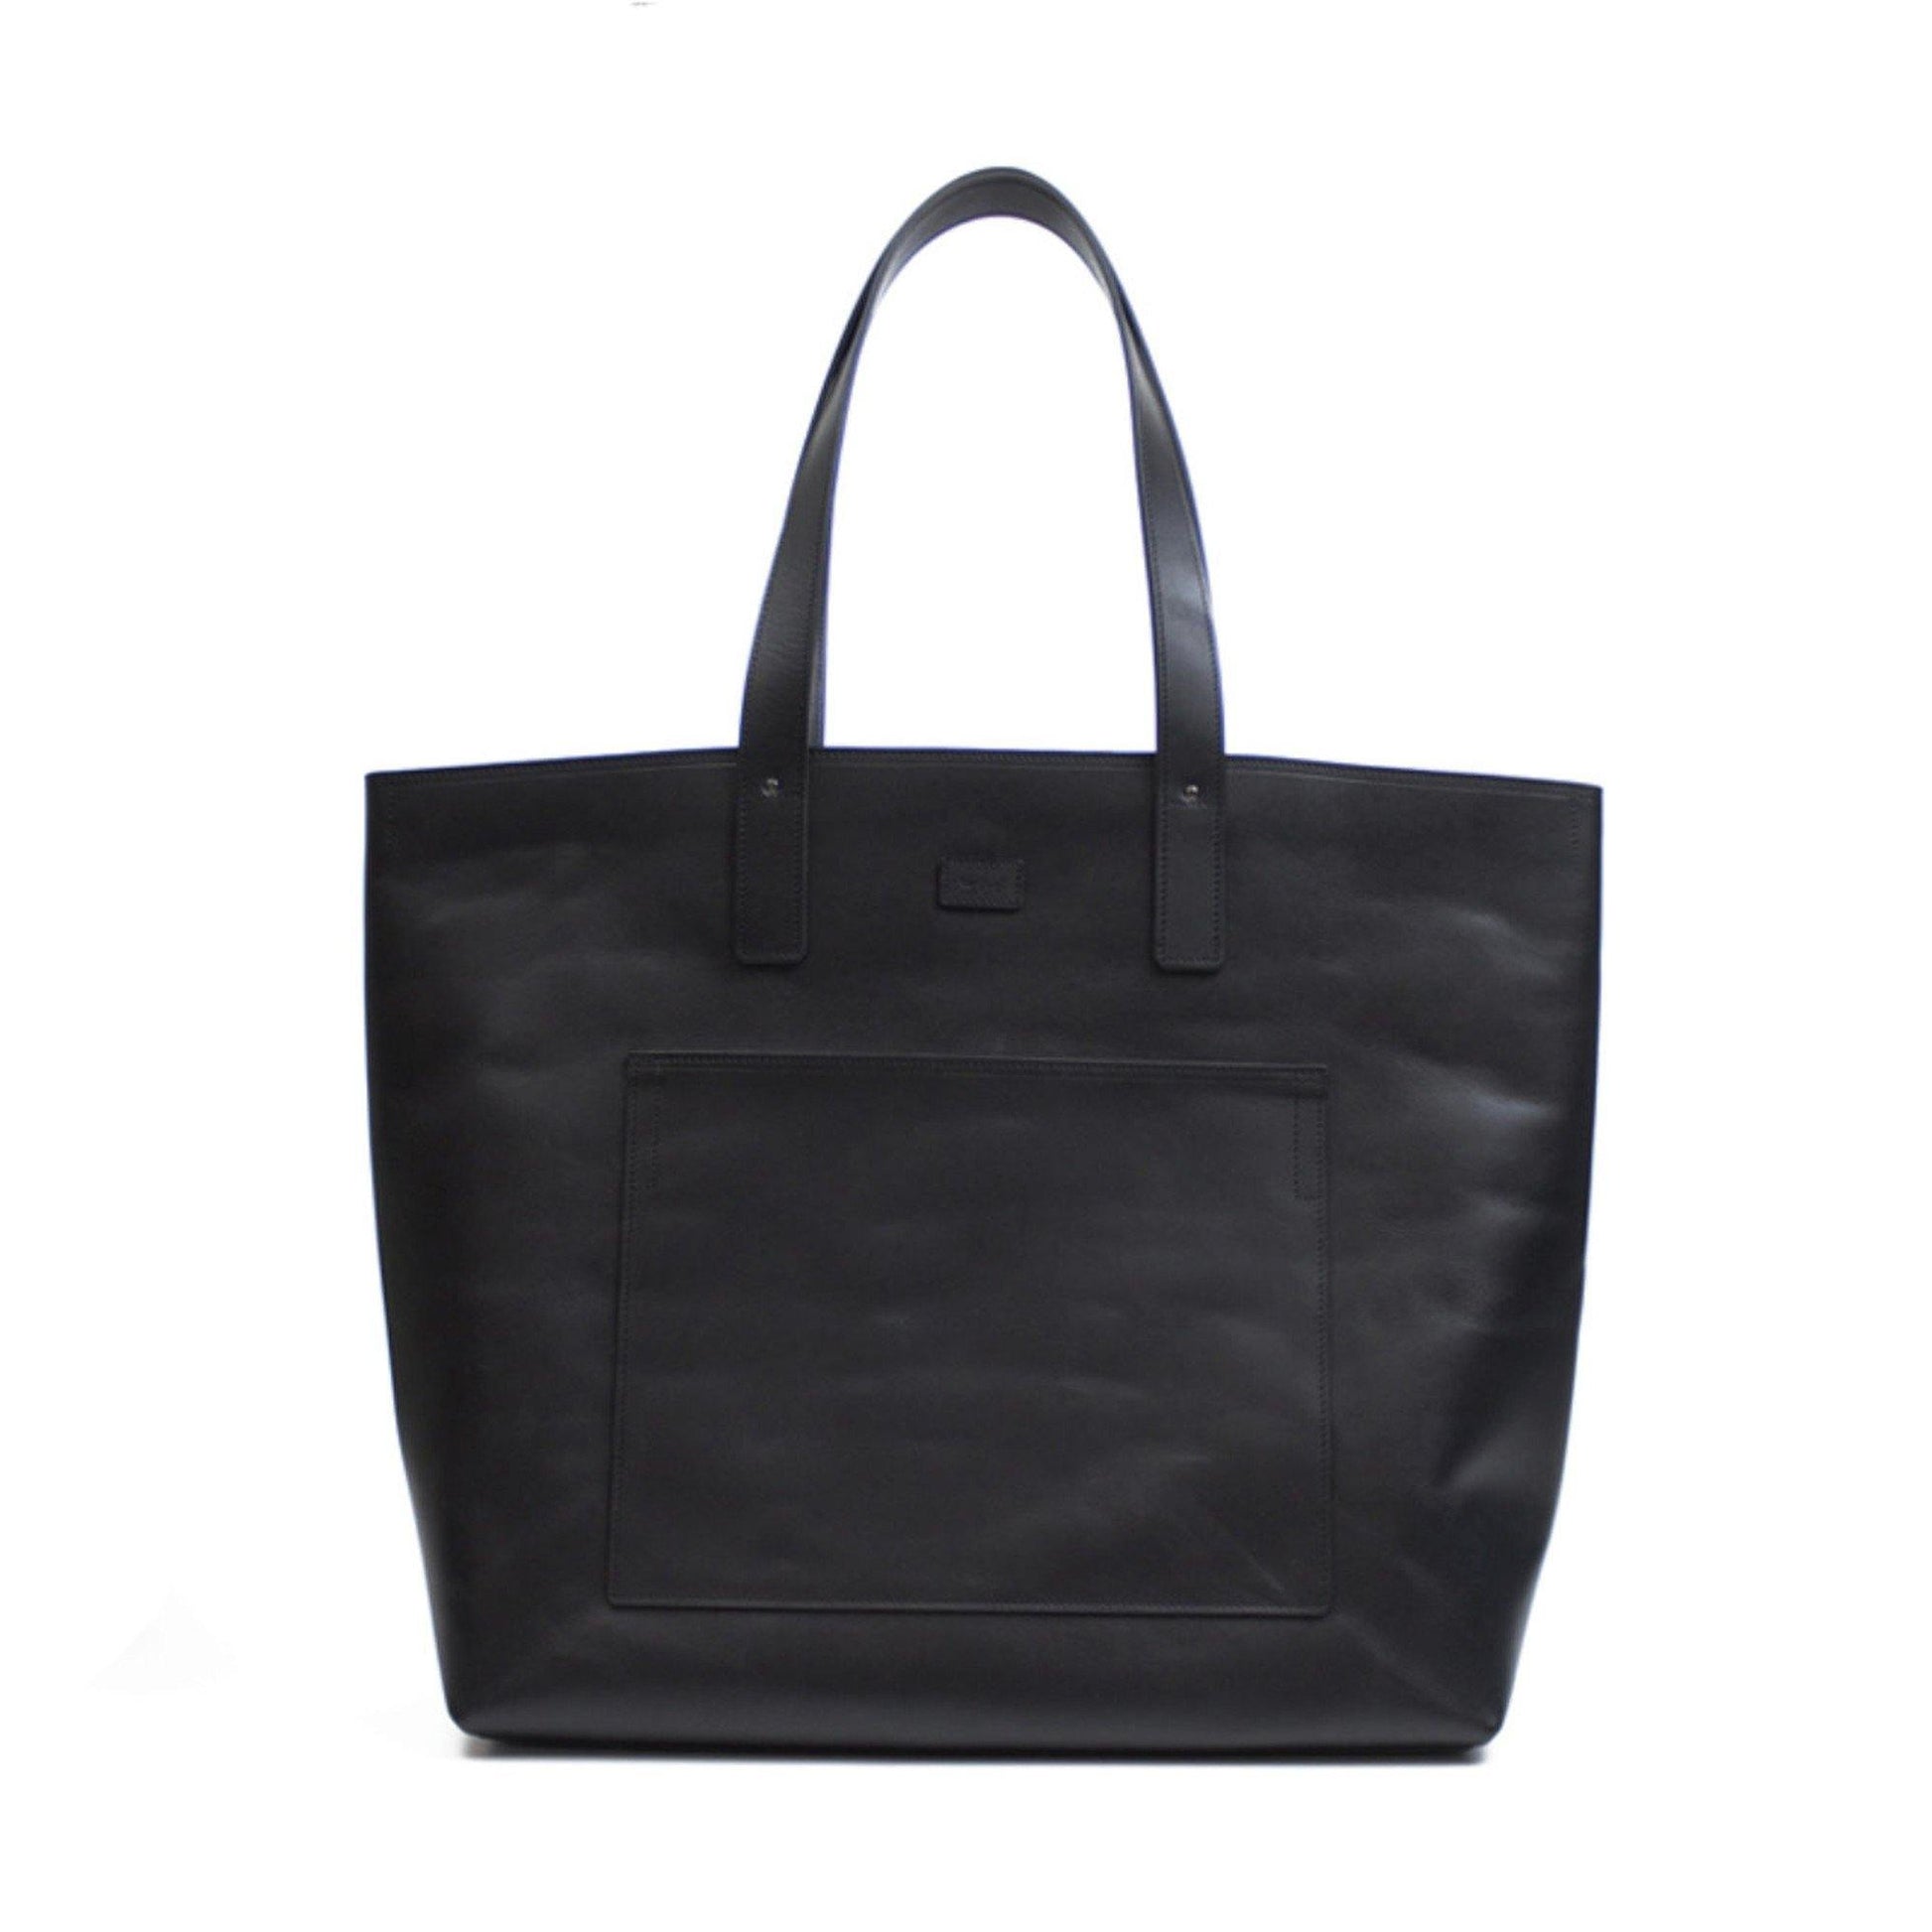 OR GLORY | Leather Tote - Sopwith camel